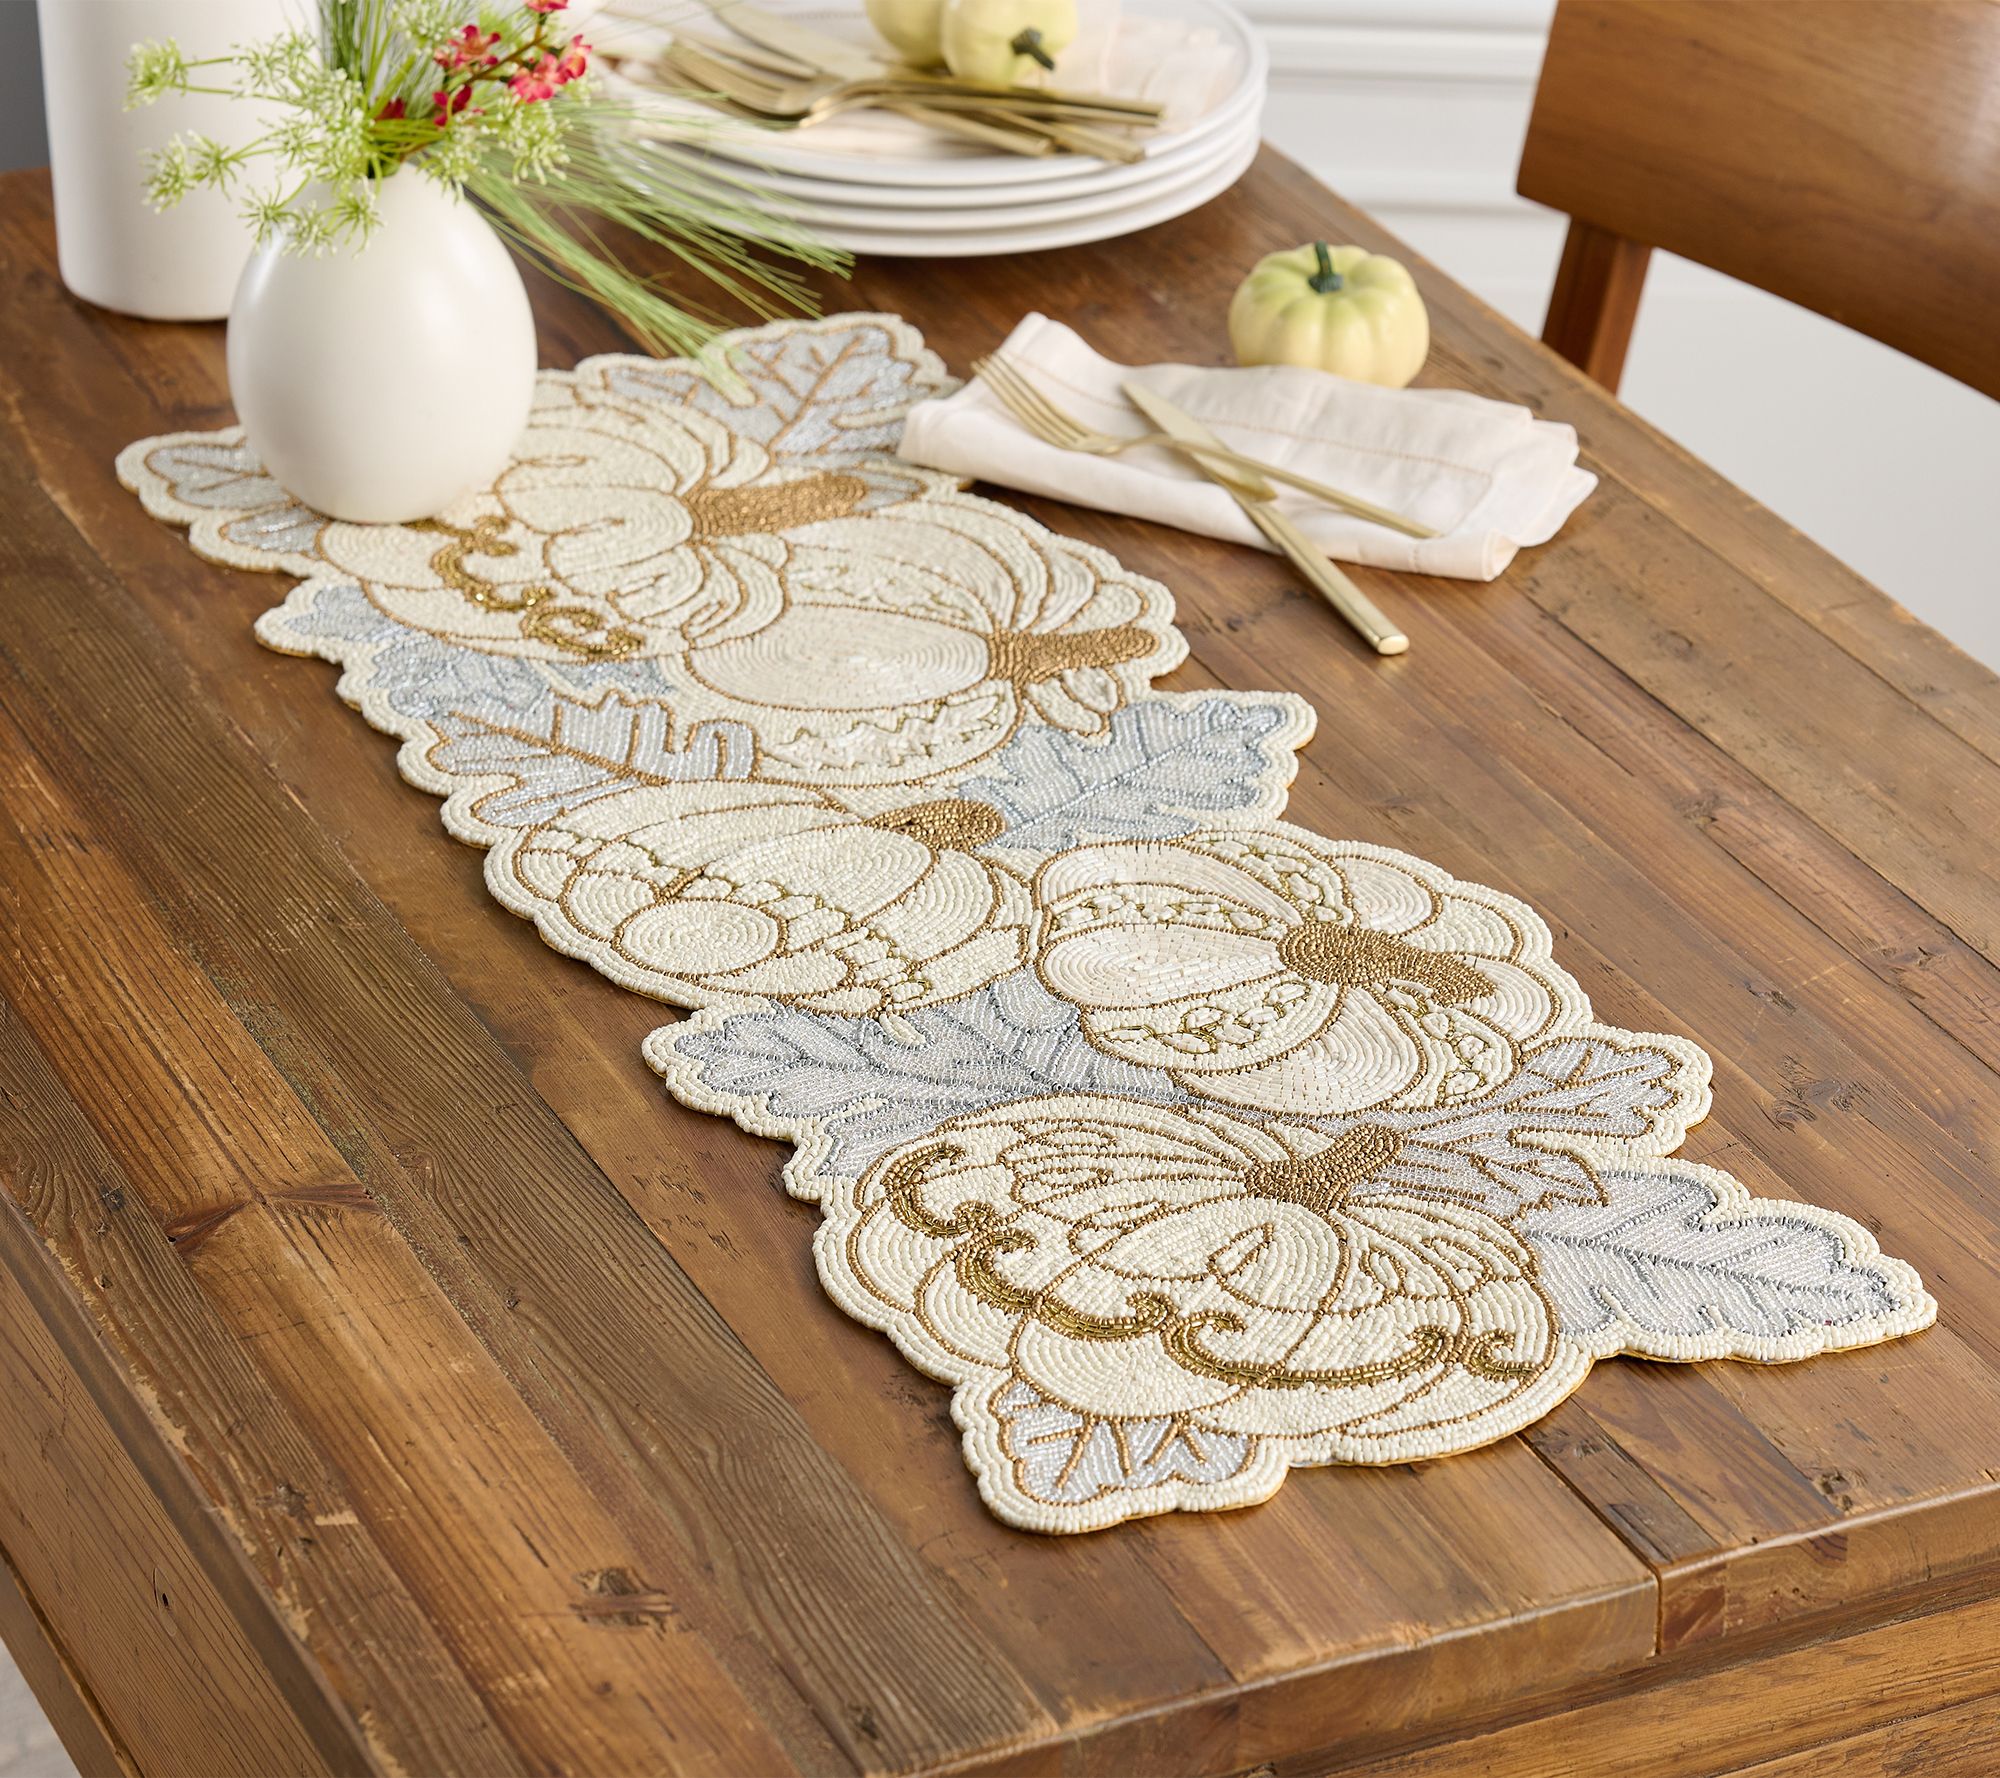 Protective plain white paper doilies For The Dining Table 